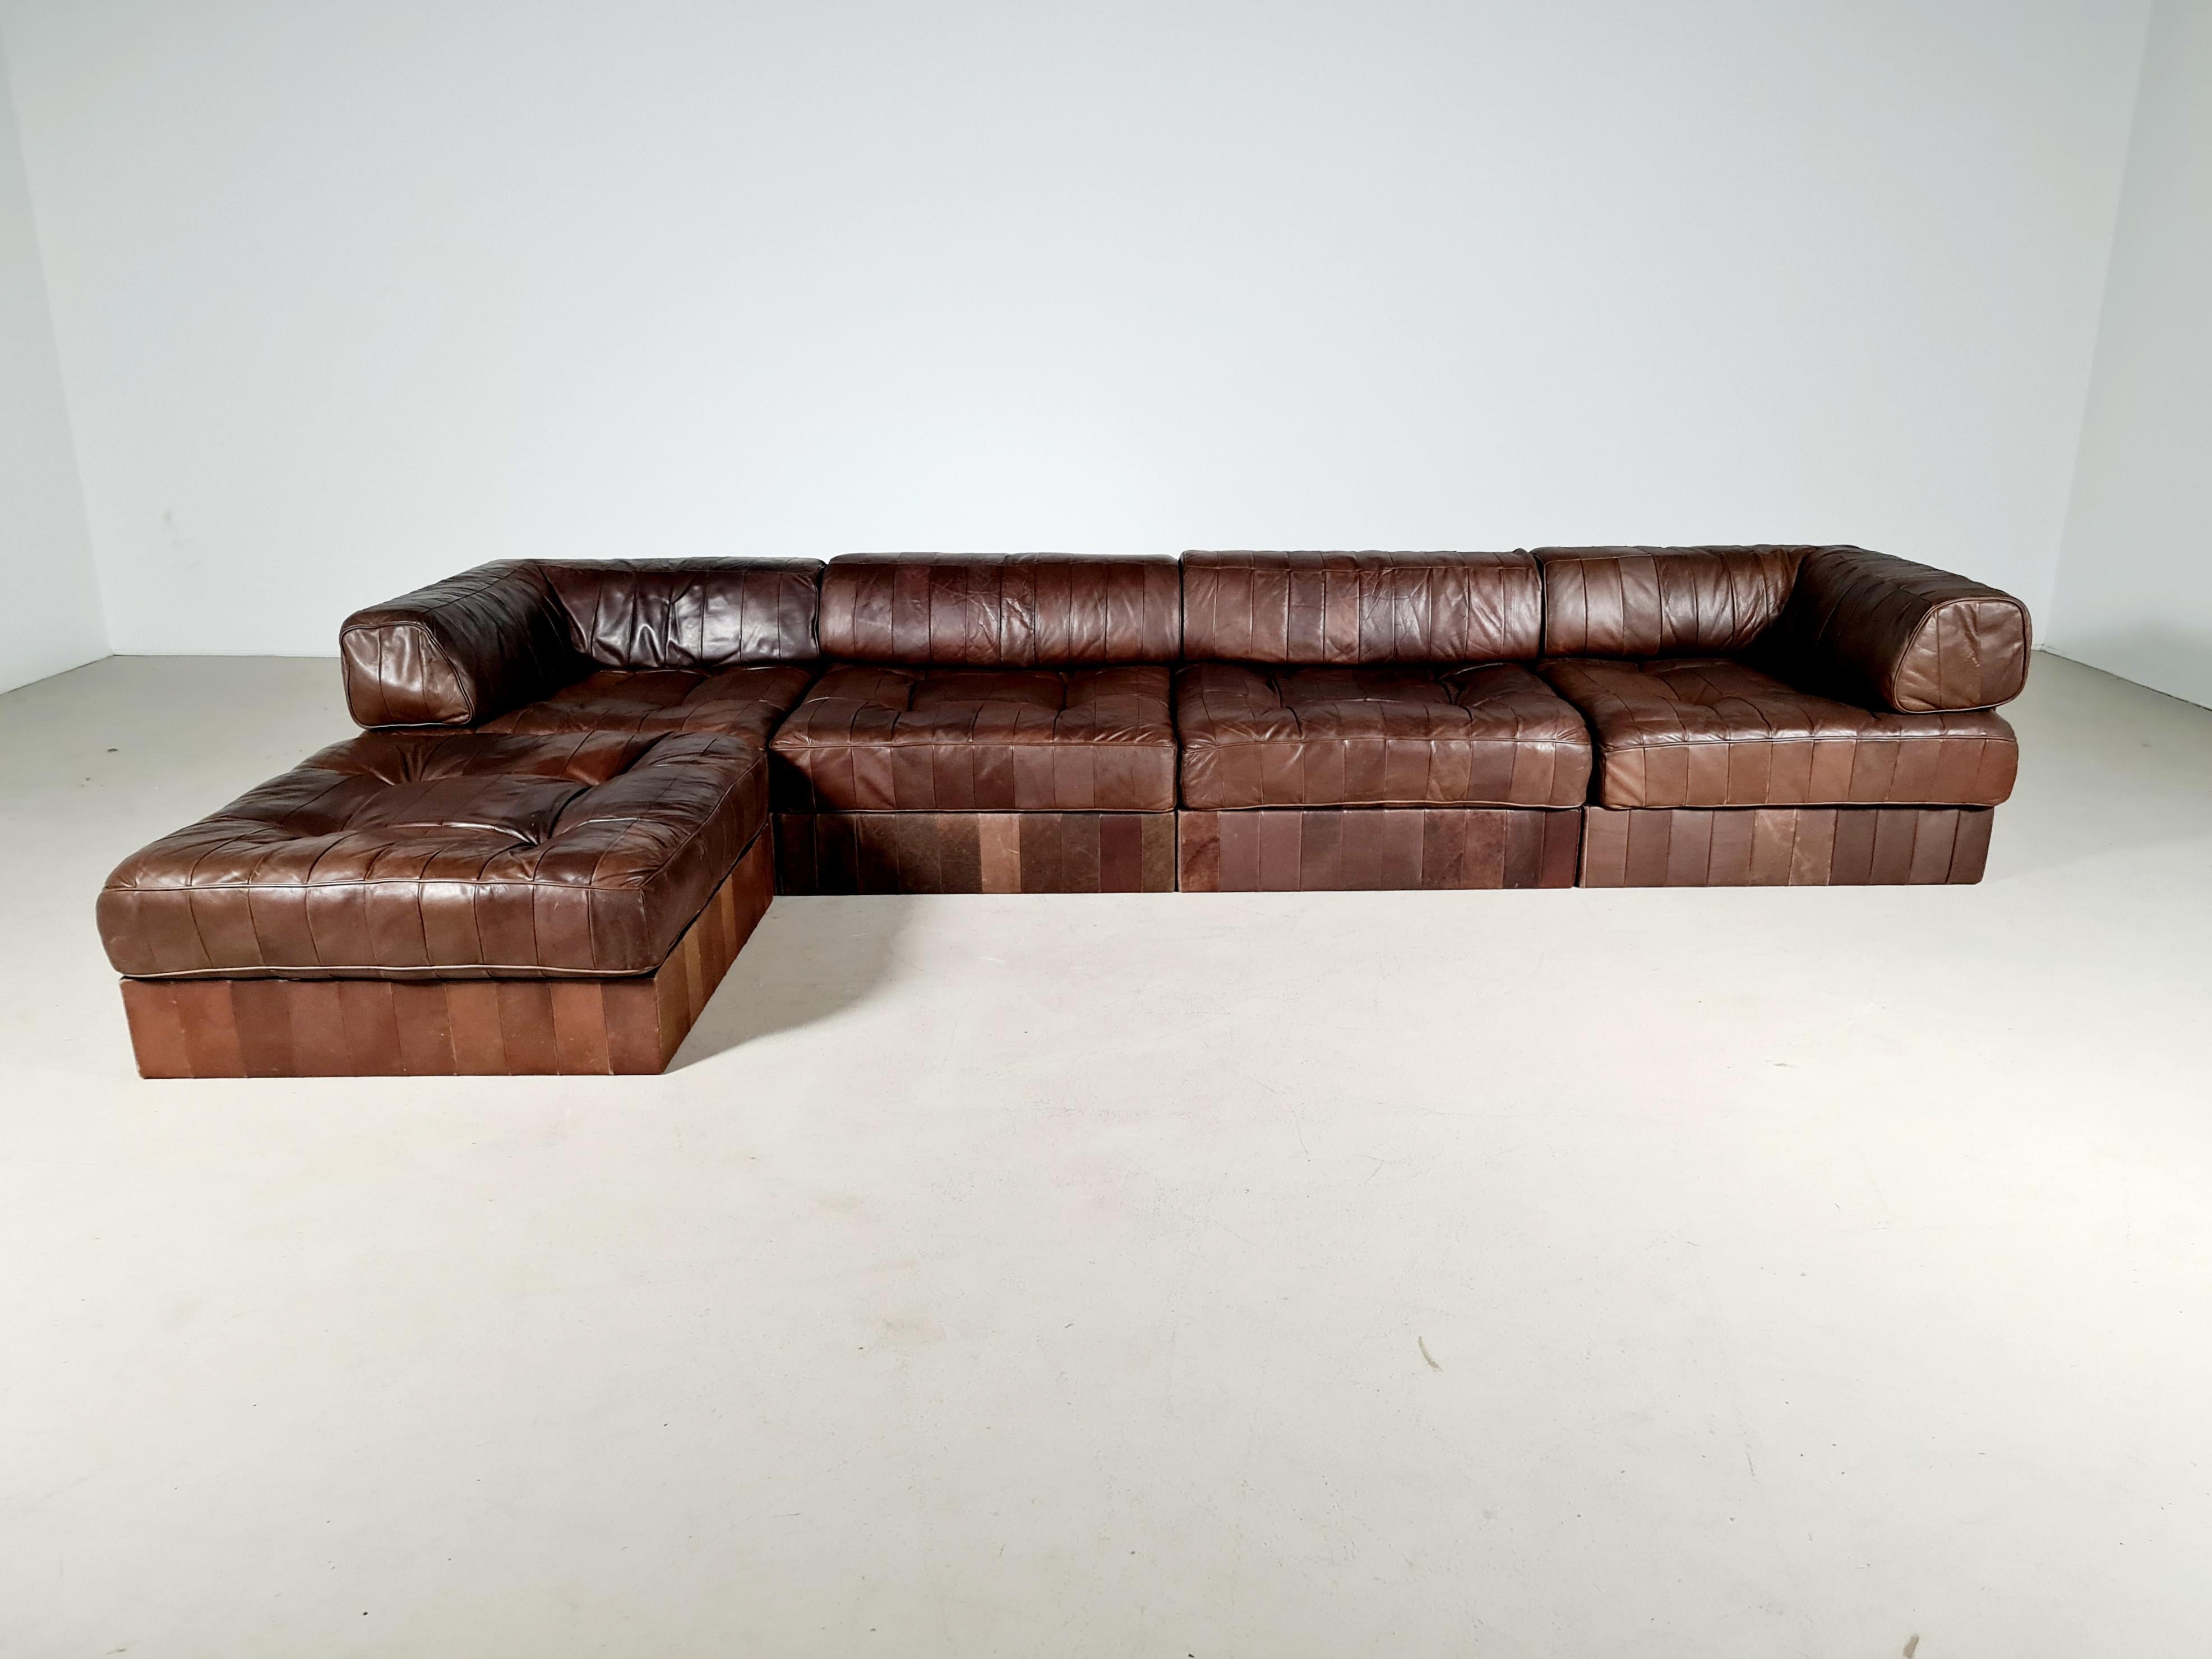 De Sede DS 88 sectional sofa in patchwork brown leather. The sofa is in 5 sections, each with a base leather patchwork cushion and 4 with a back cushion made from the same soft luxurious leather. An extremely comfortable sofa that's in good vintage